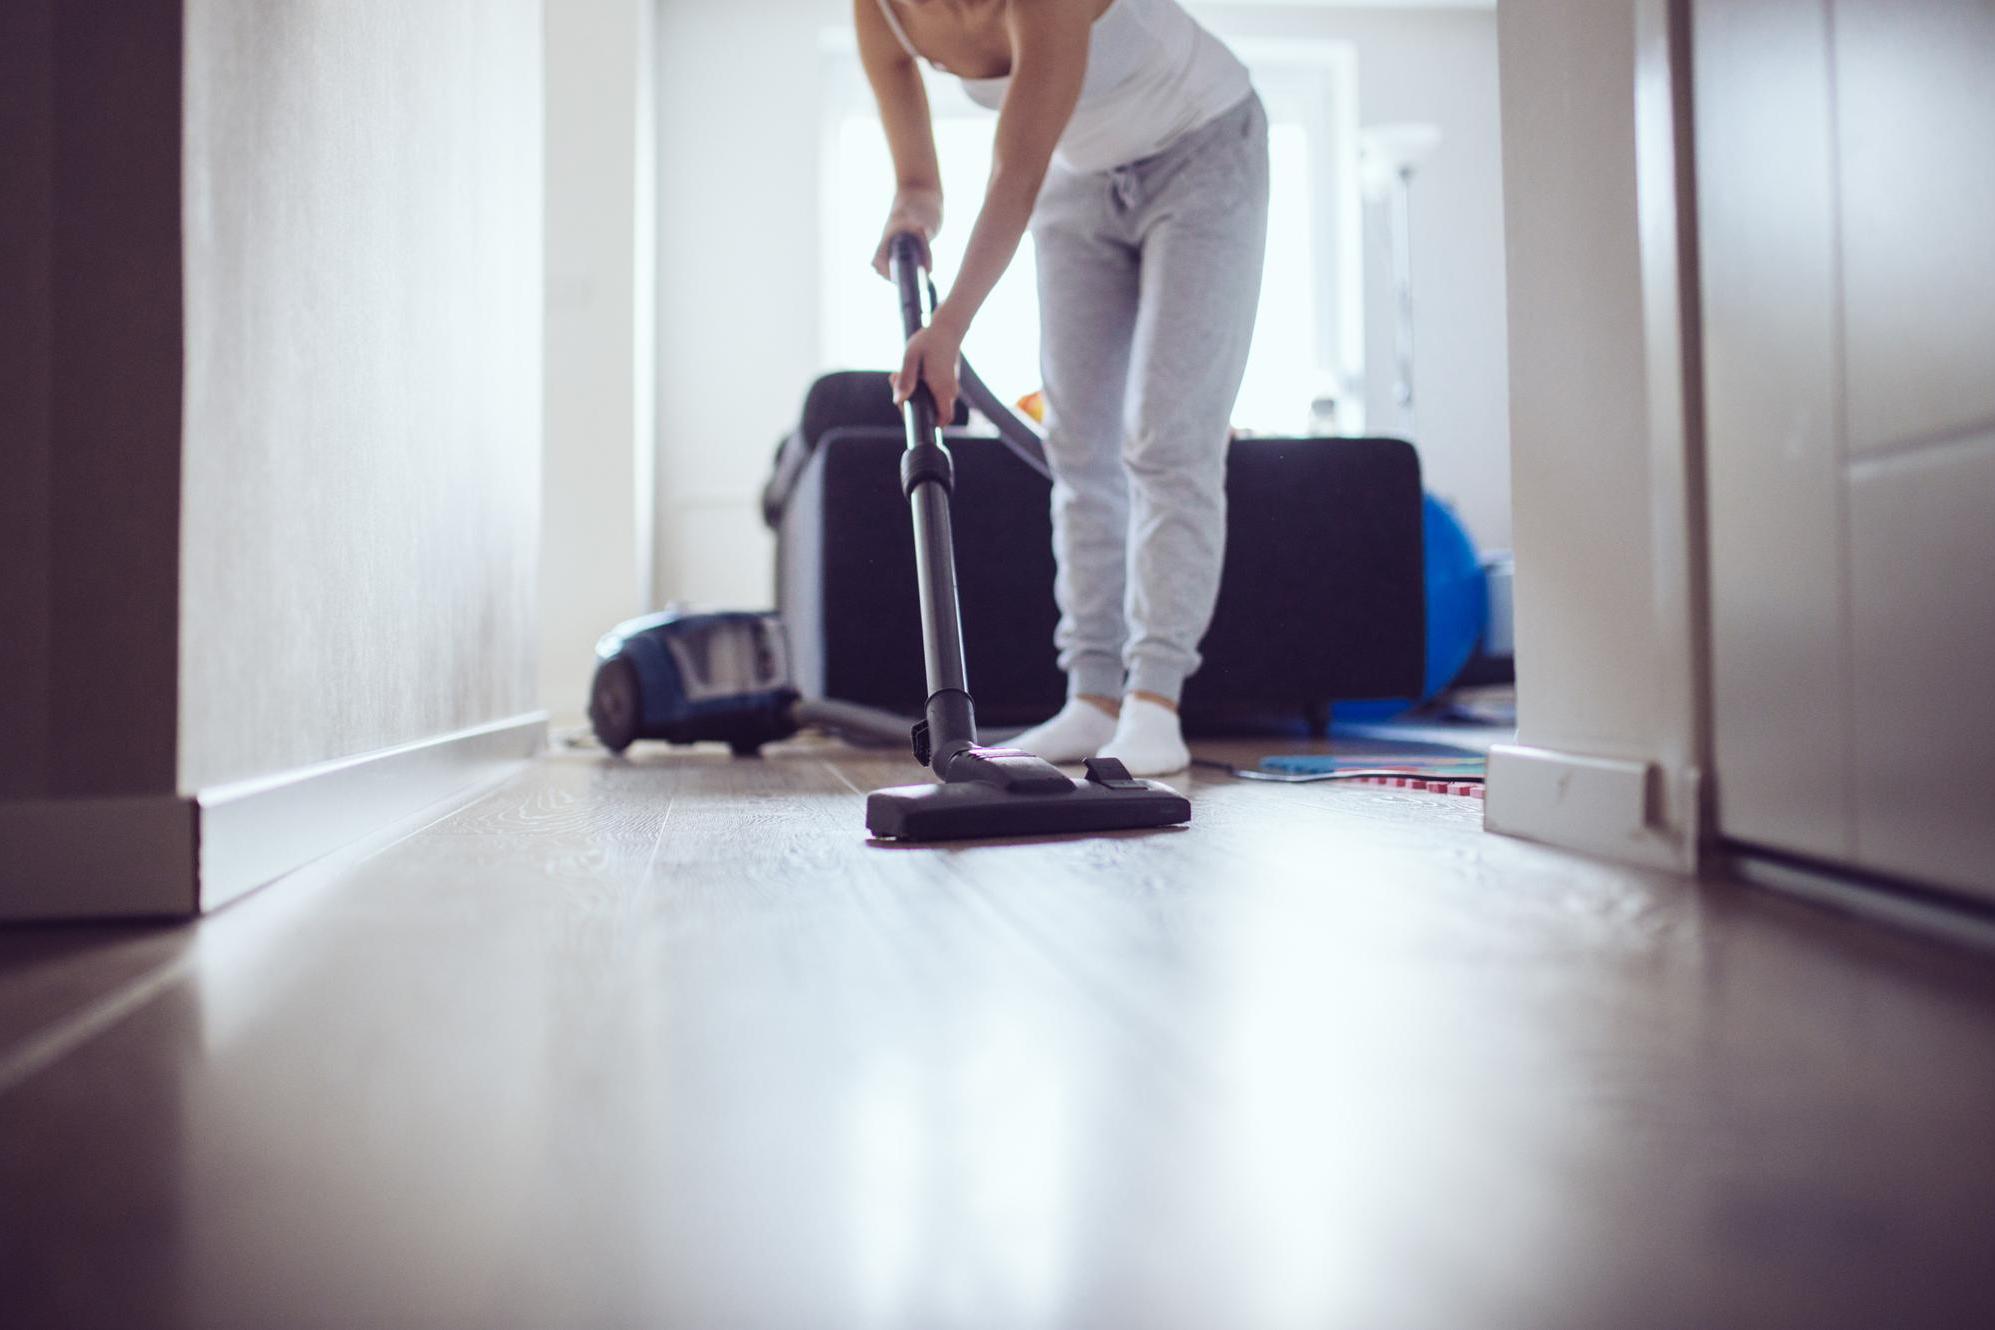 Your step-by-step guide to end of lease cleaning